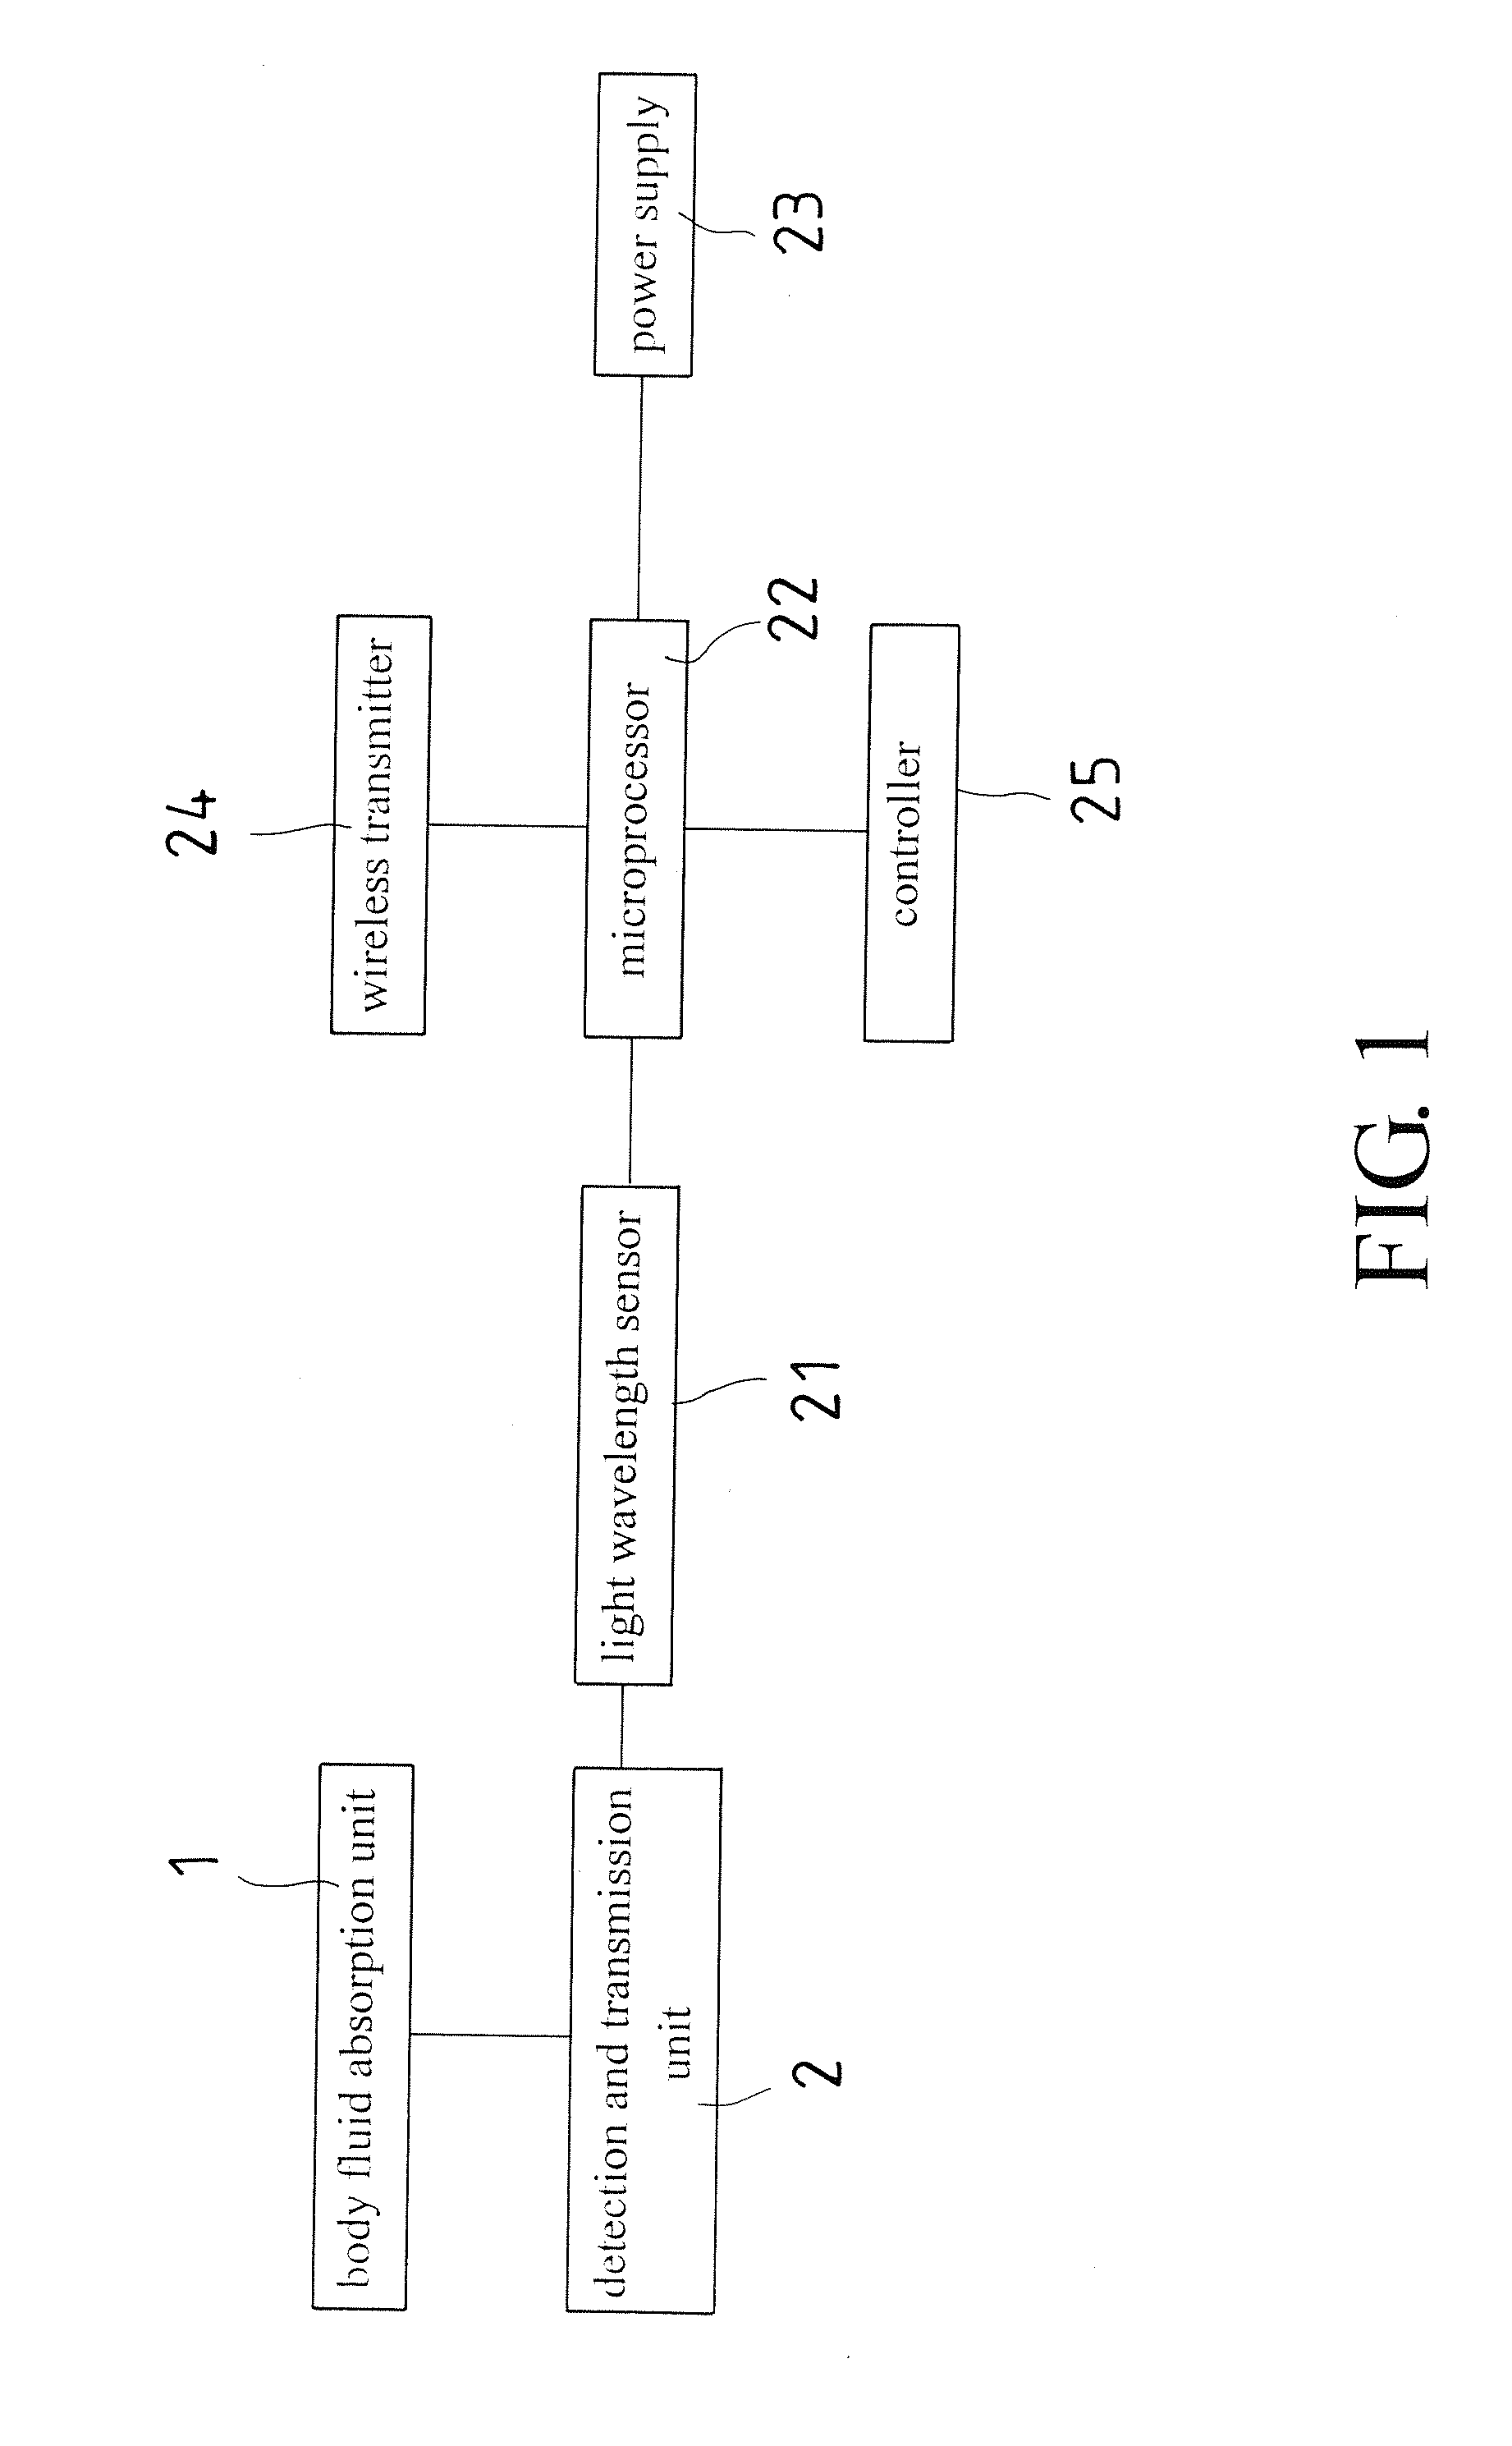 Body fluid absorption object wetting alarm method and apparatus